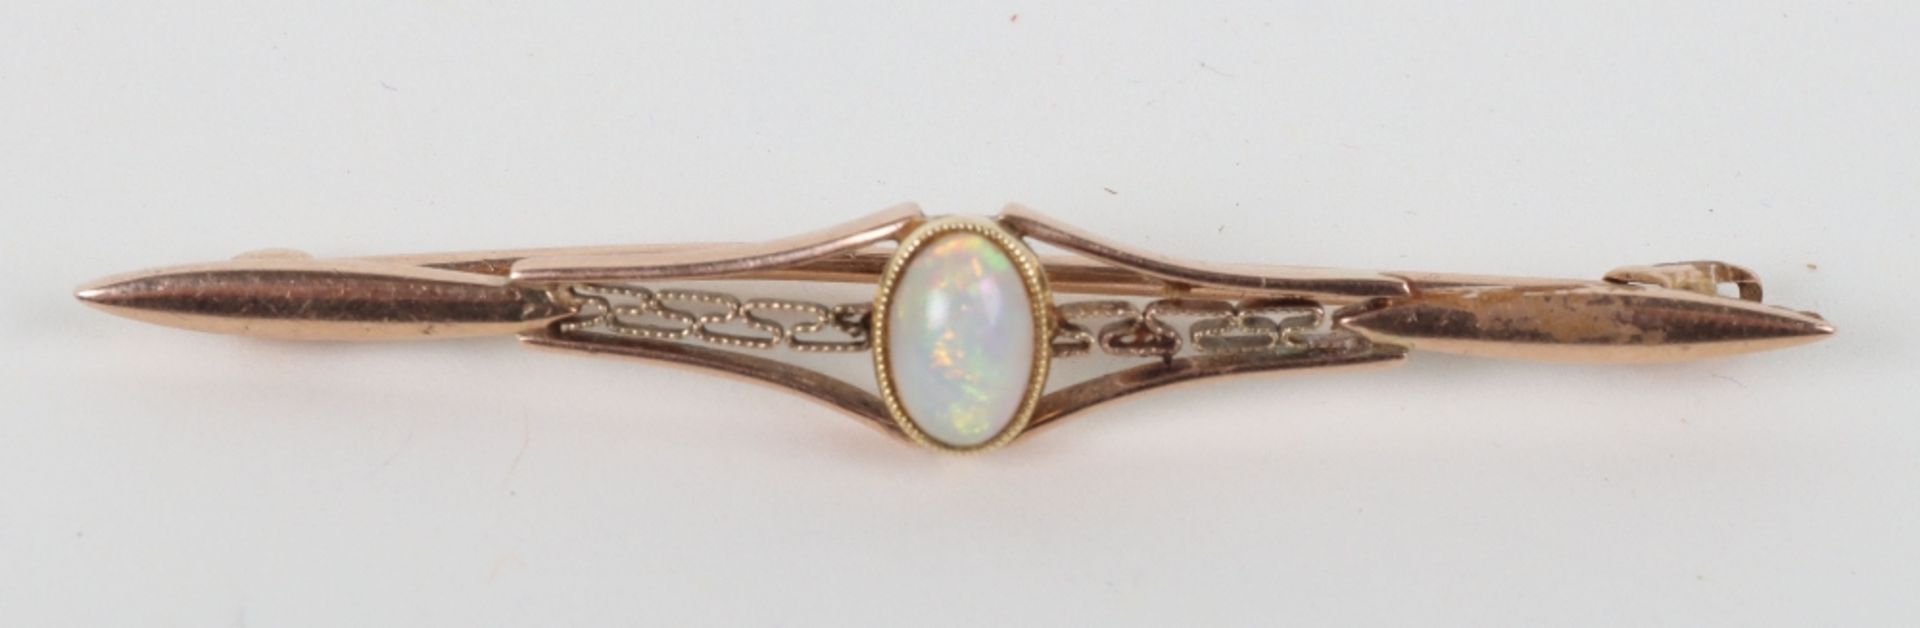 An Edwardian 9ct gold and opal set brooch